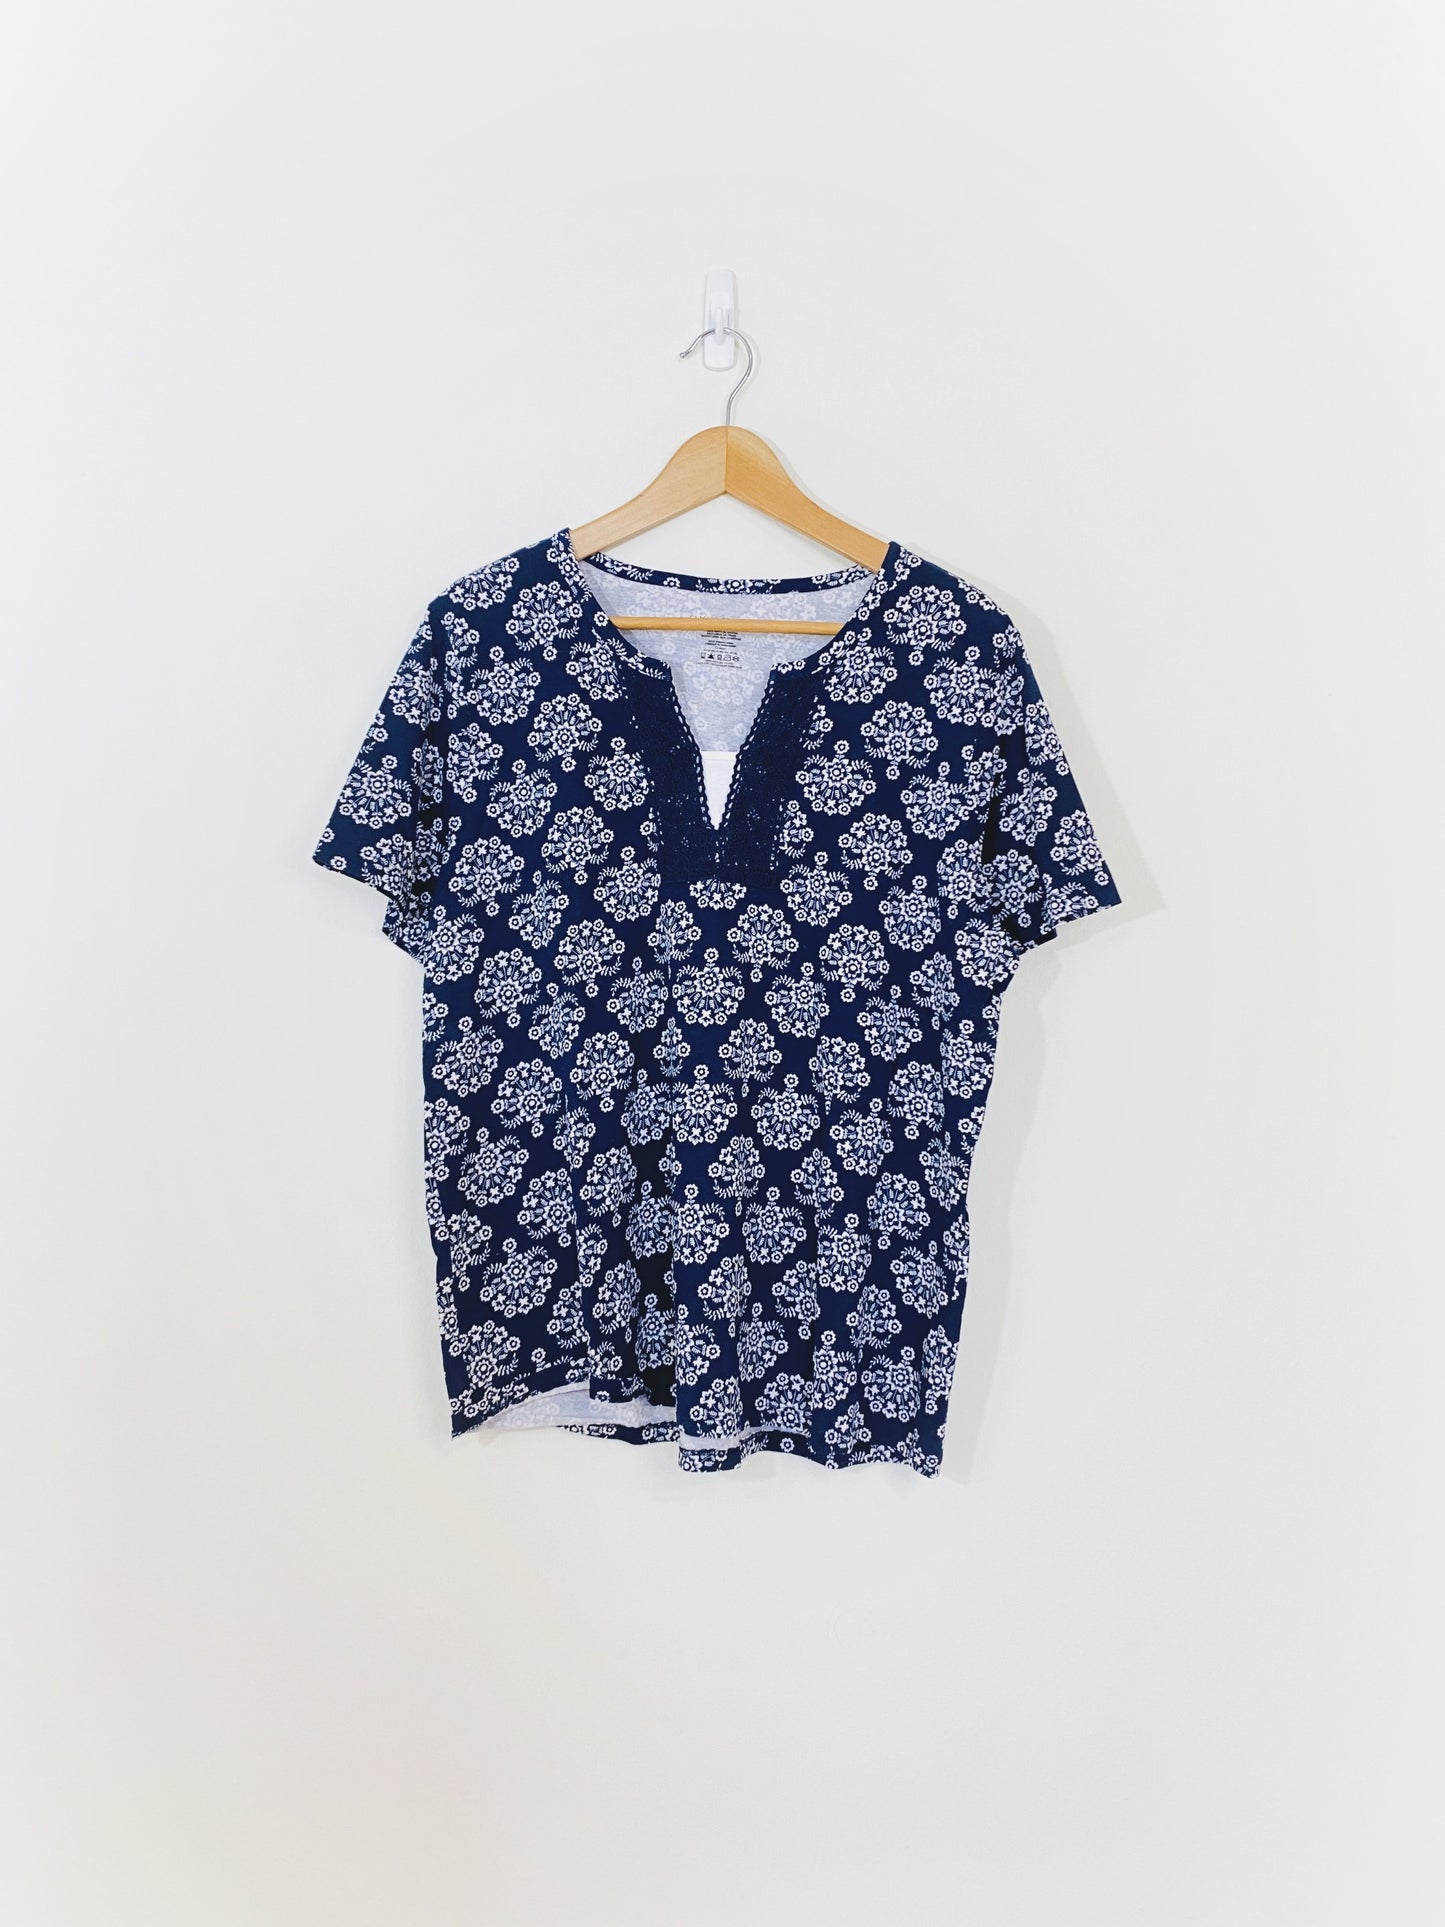 Patterned Navy Tee (XL)